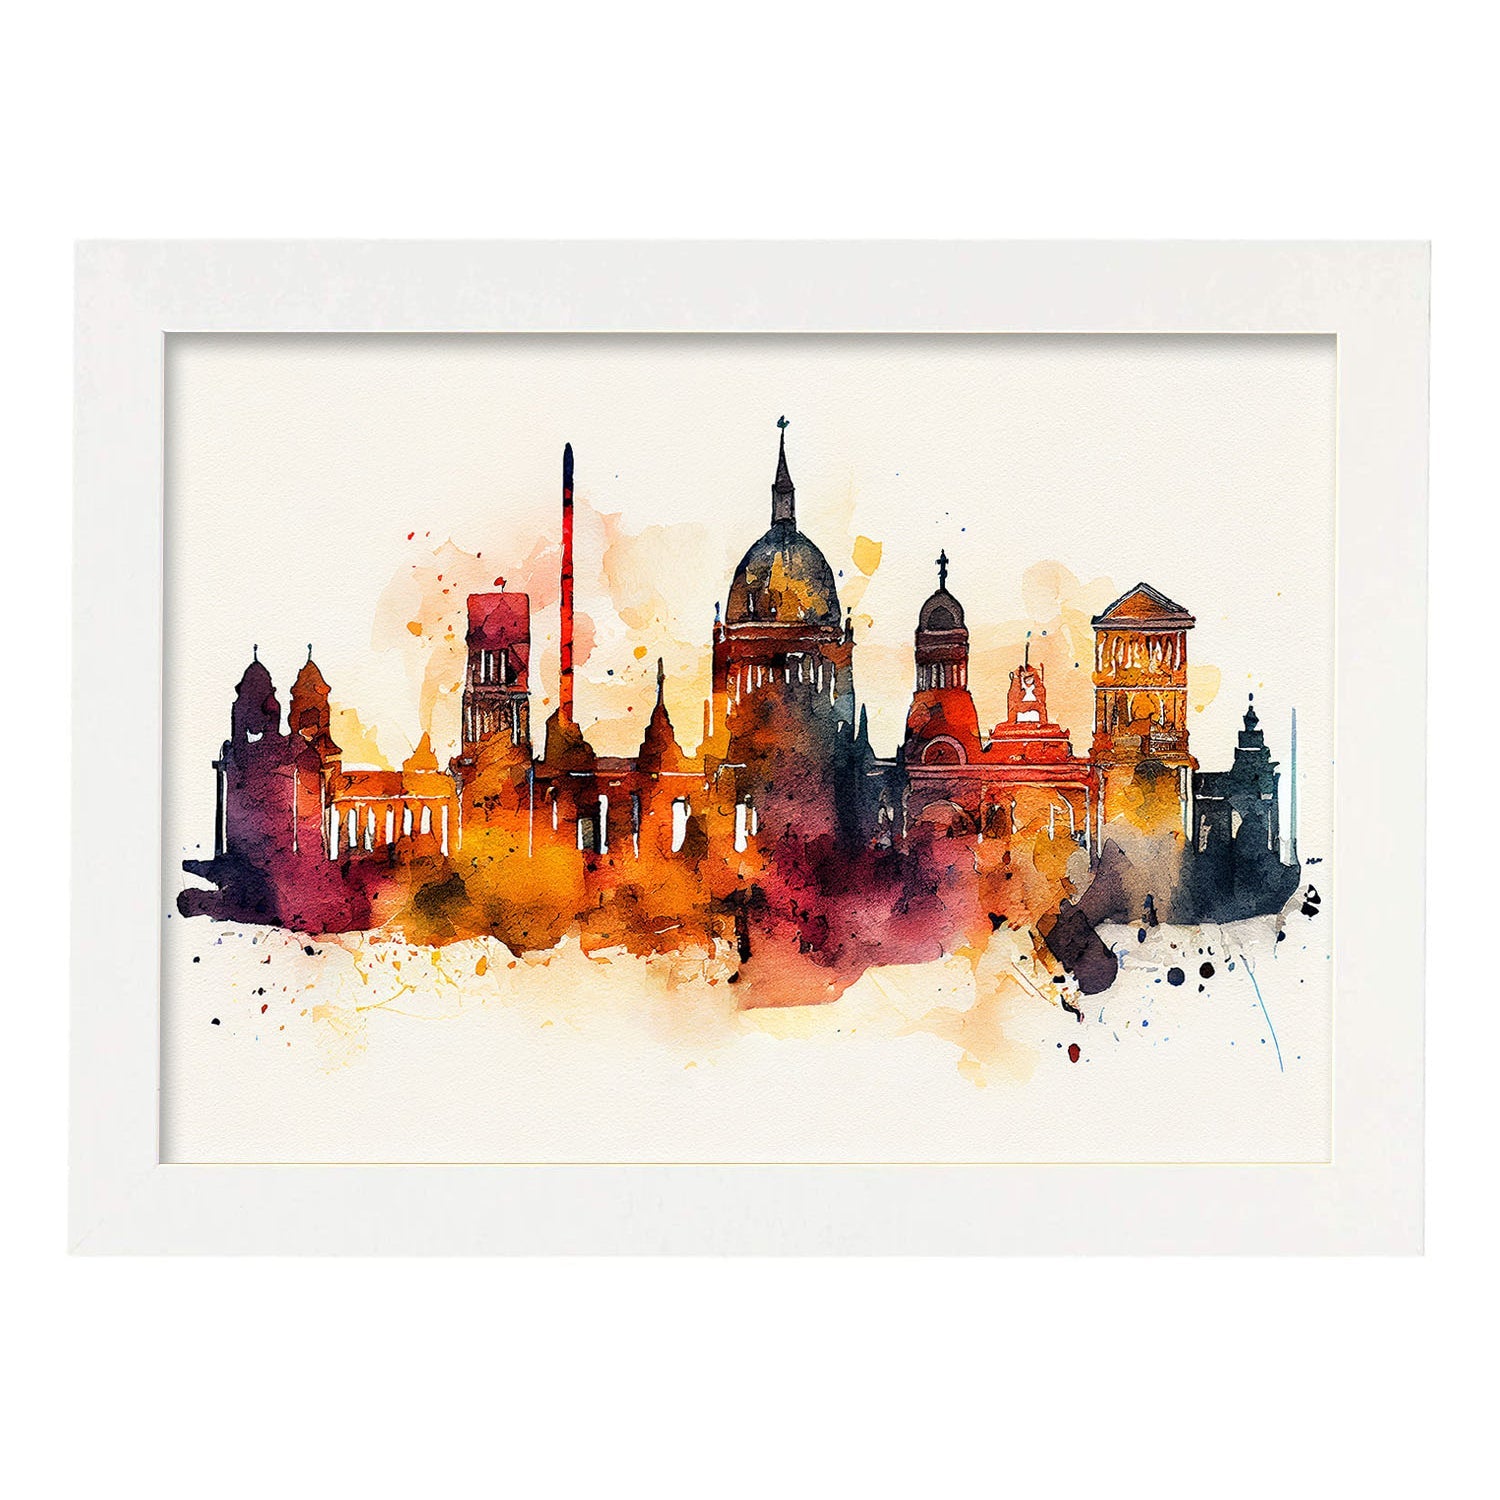 Nacnic watercolor of a skyline of the city of Berlin_1. Aesthetic Wall Art Prints for Bedroom or Living Room Design.-Artwork-Nacnic-A4-Marco Blanco-Nacnic Estudio SL